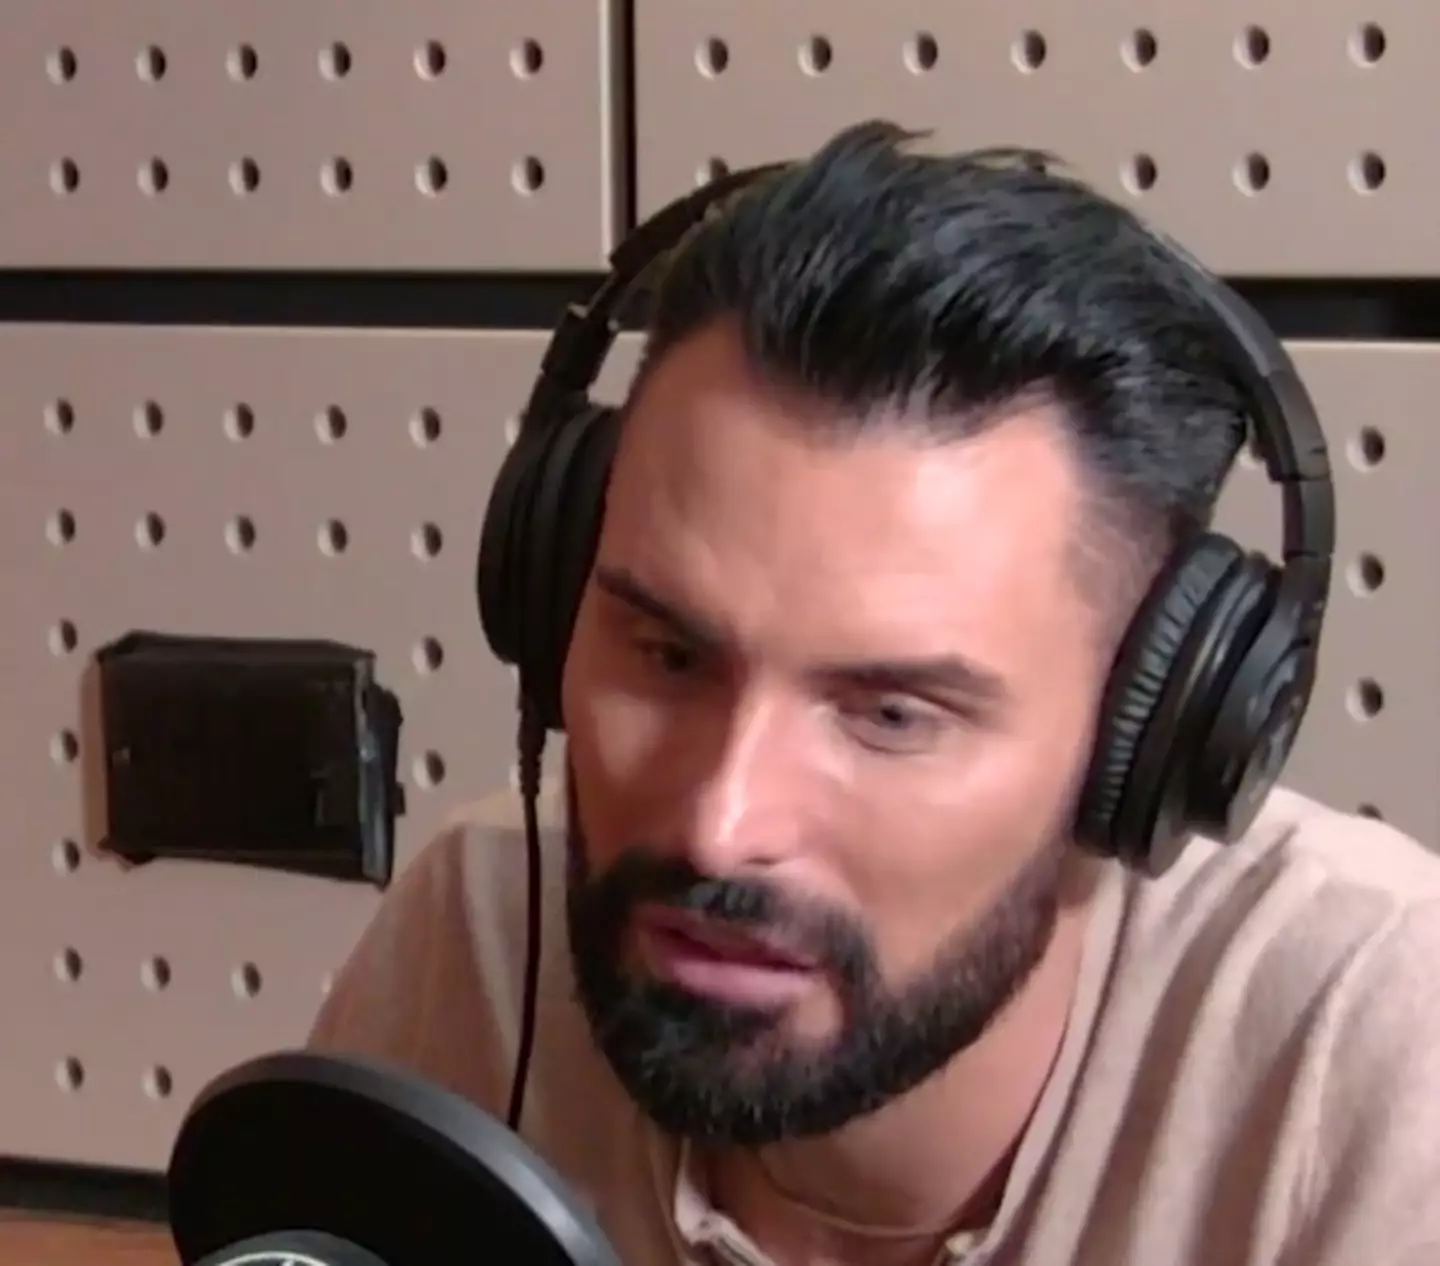 Rylan Clark spoke about his attempts at suicide on Matt Willis' On The Mend podcast.